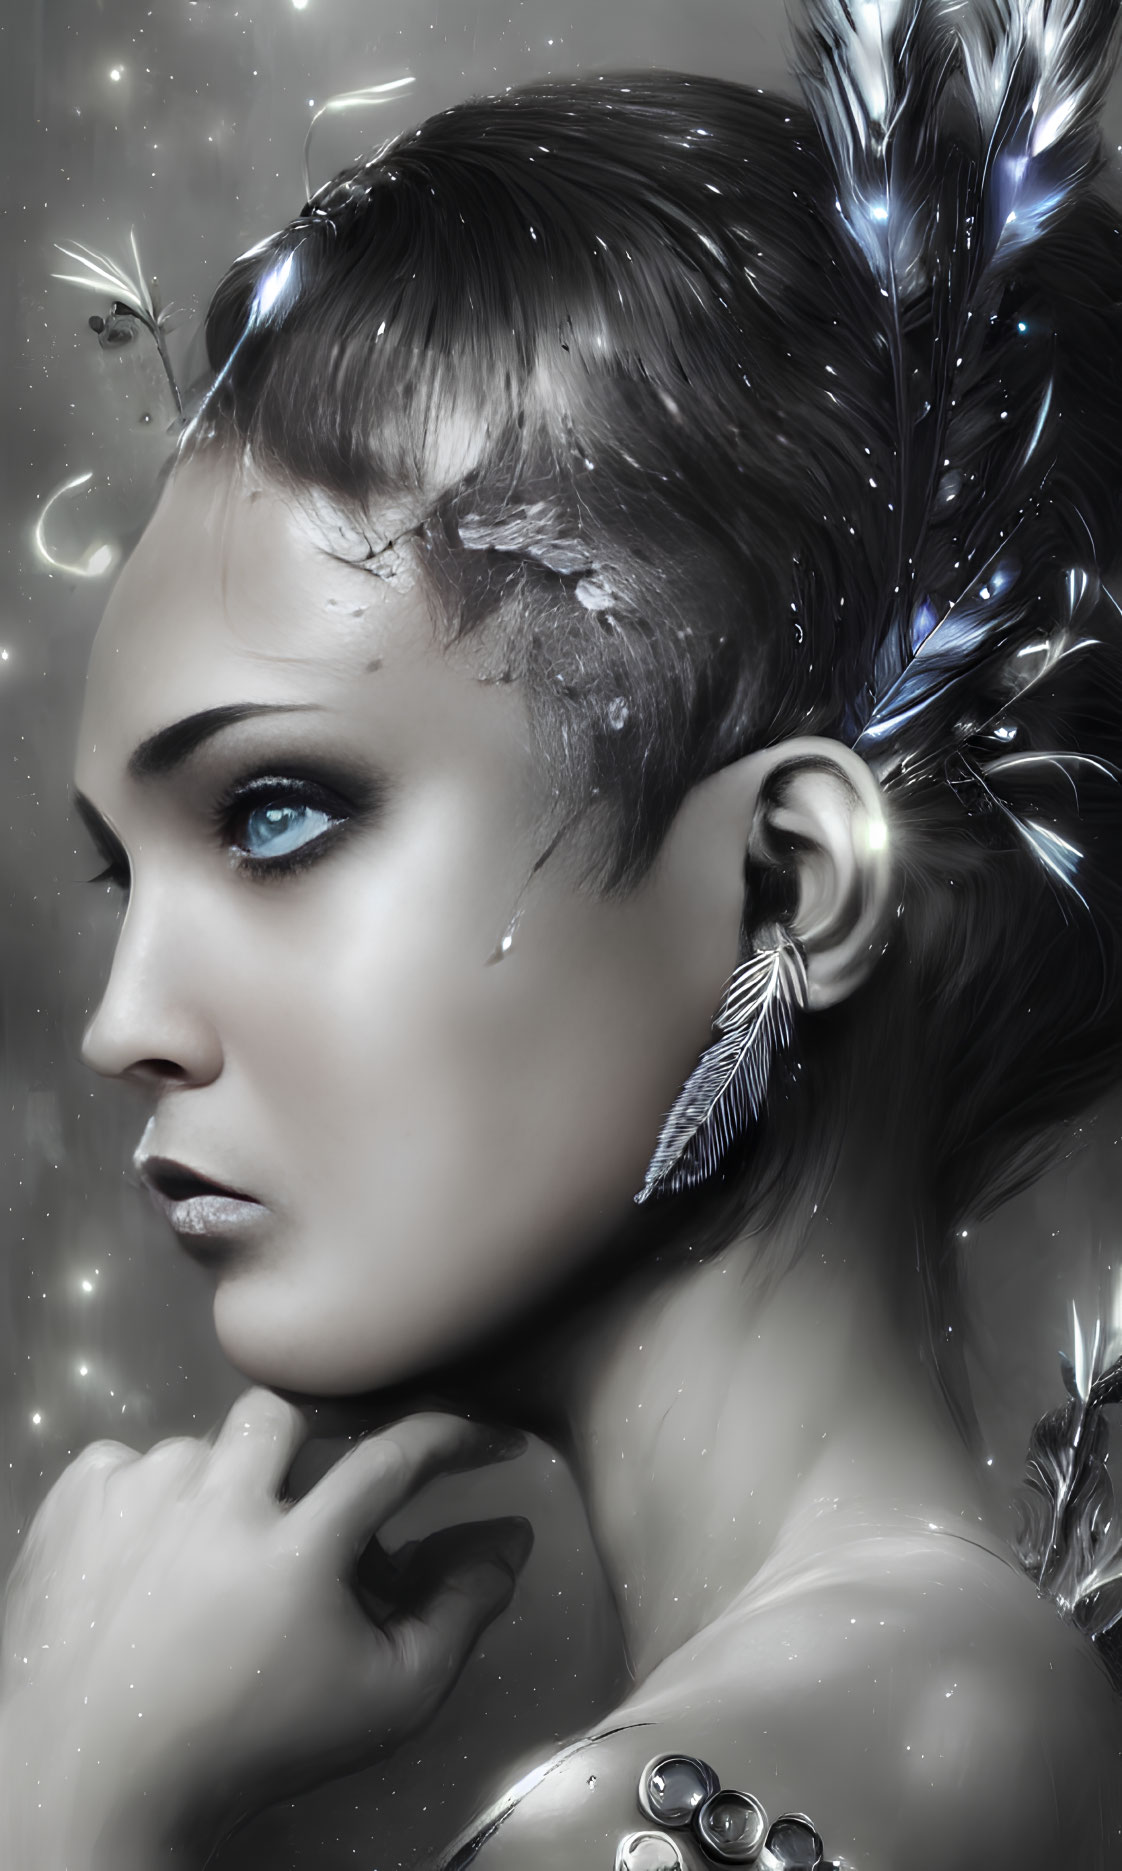 Metallic-skinned woman with feather adornments and earring on starry backdrop